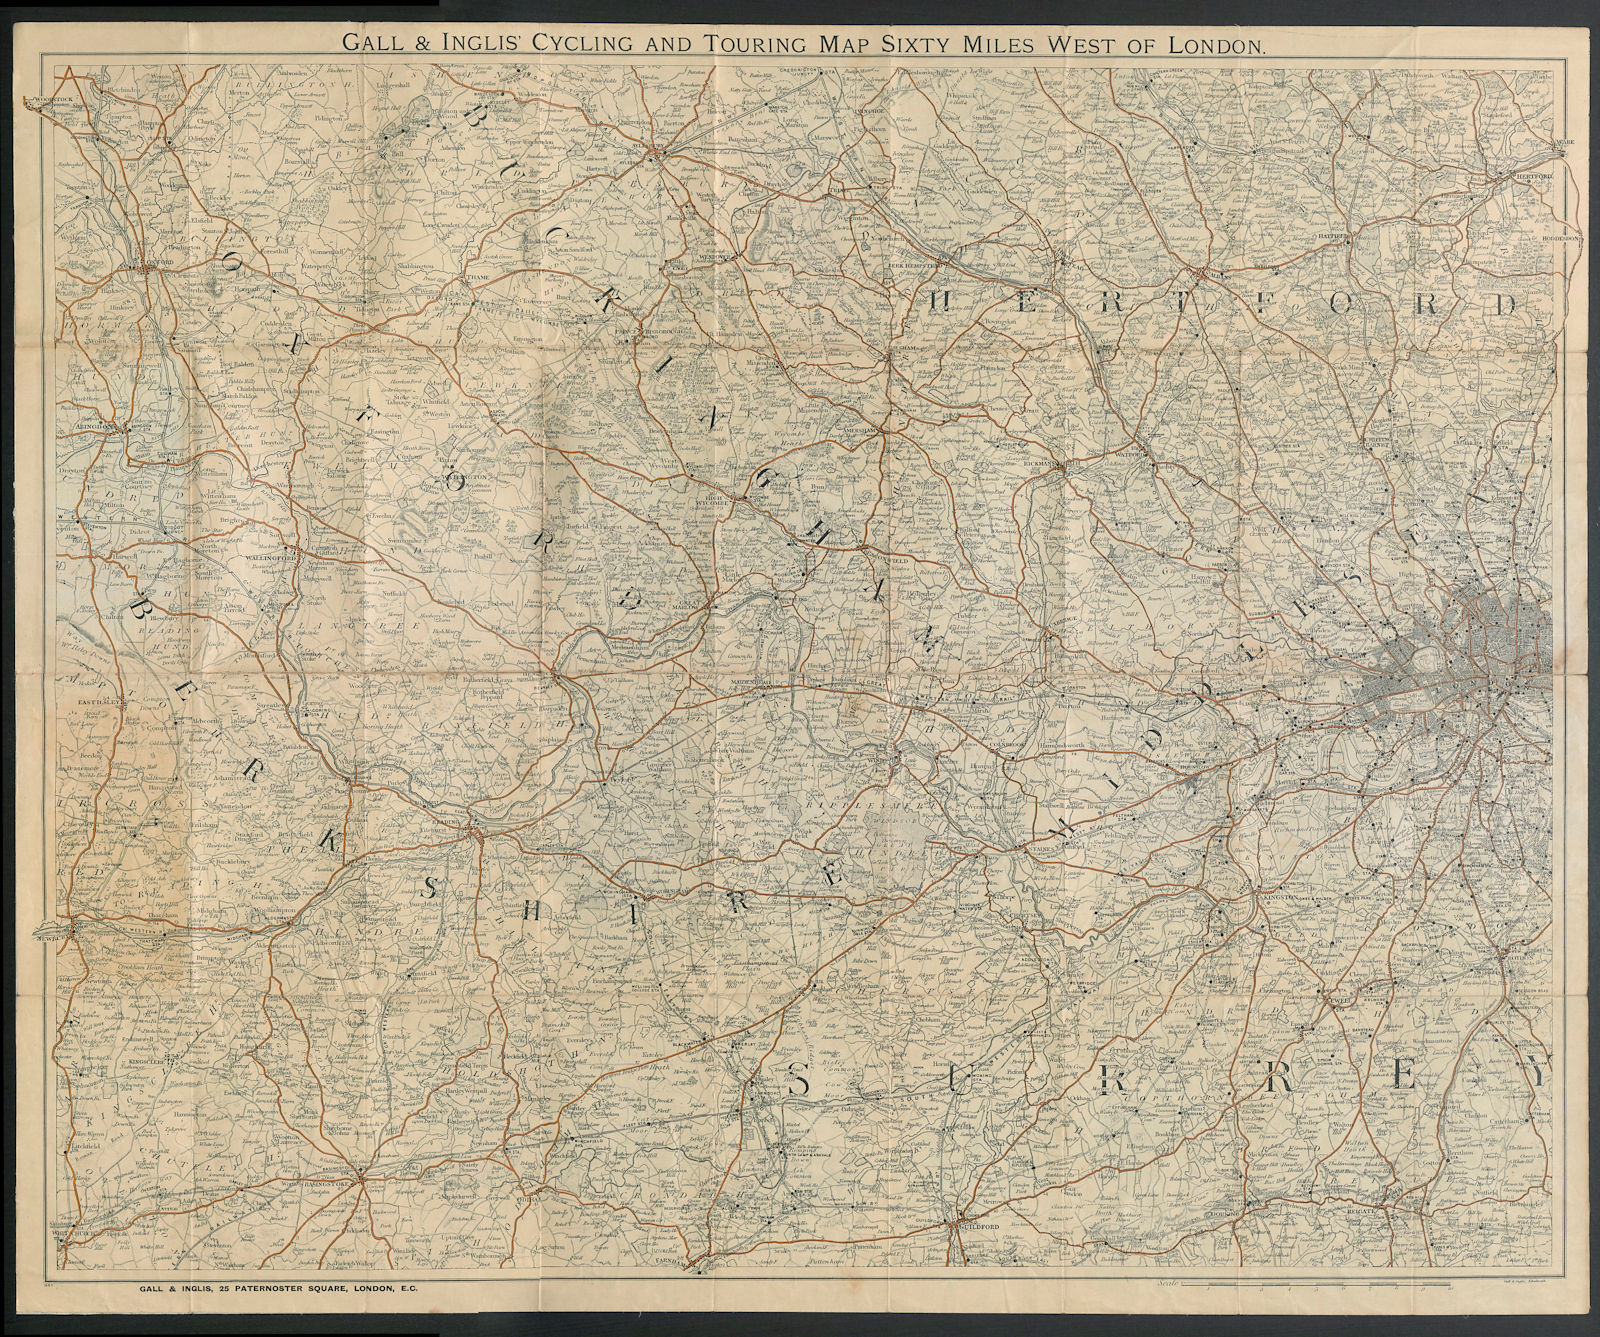 Gall & Inglis Cycling & Touring Map 60 miles west of London. Thames Valley c1890